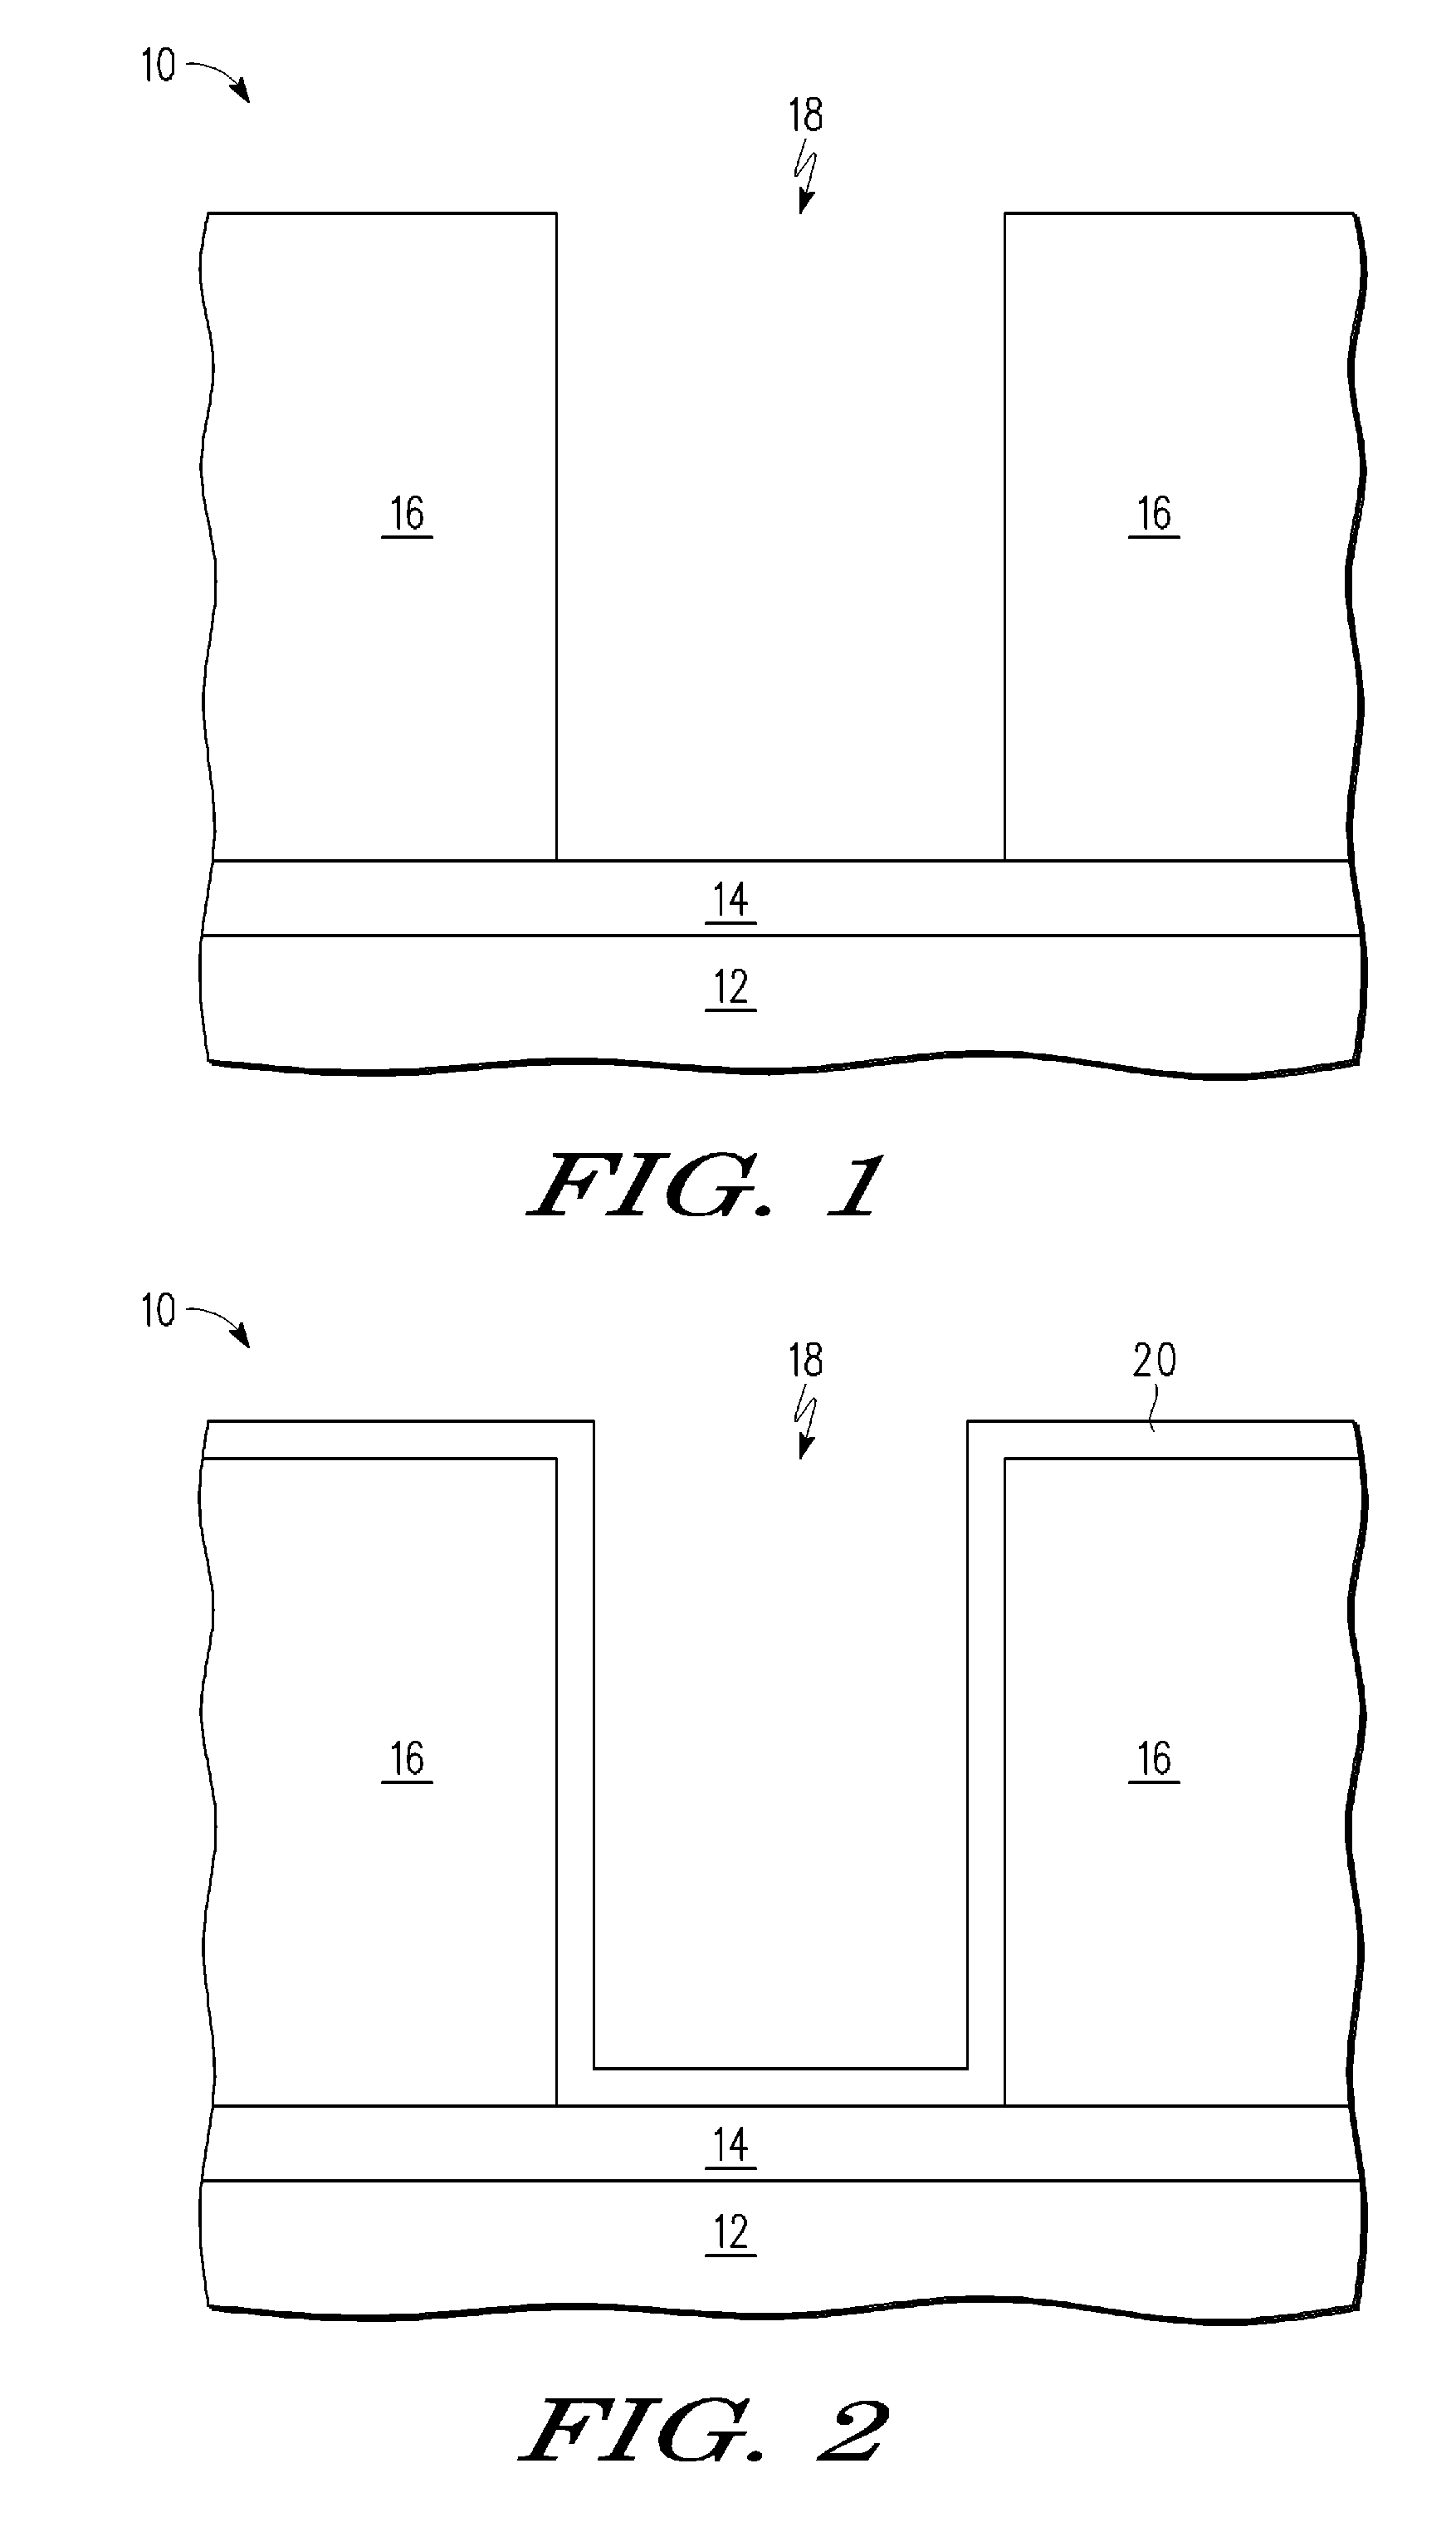 Method of making a semiconductor device including a bridgeable material